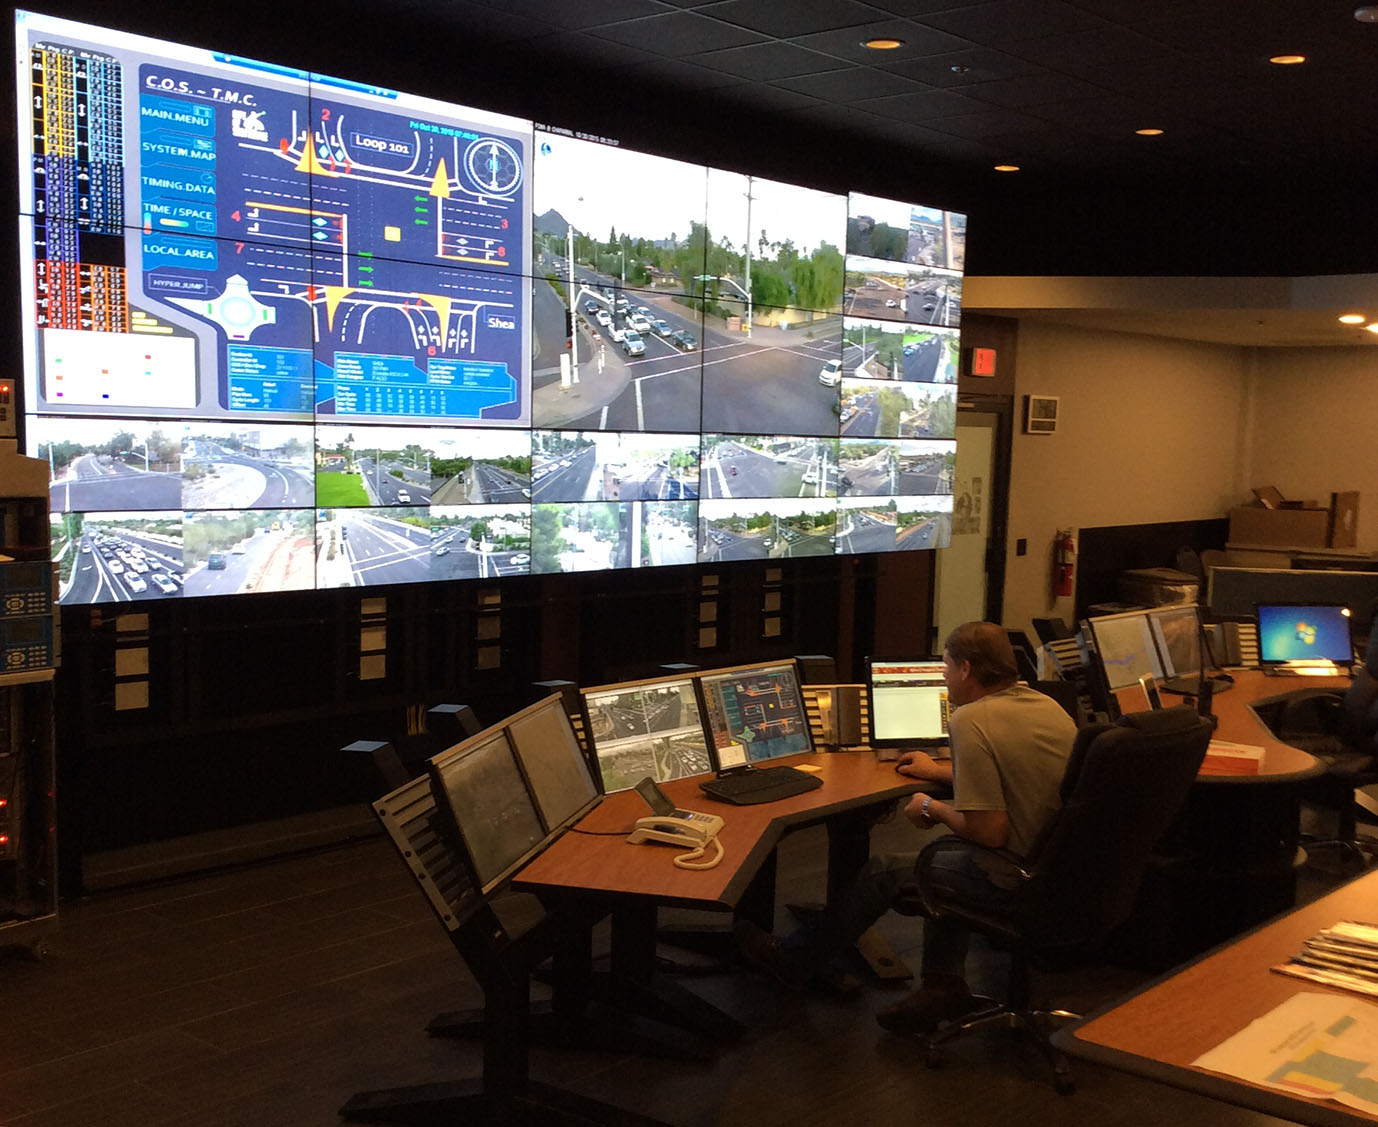 Scottsdale, Arizona implemented a few years ago an Intelligent Transportation System that connects video cameras, traffic signals and dynamic signs using mesh network for IoT devices.